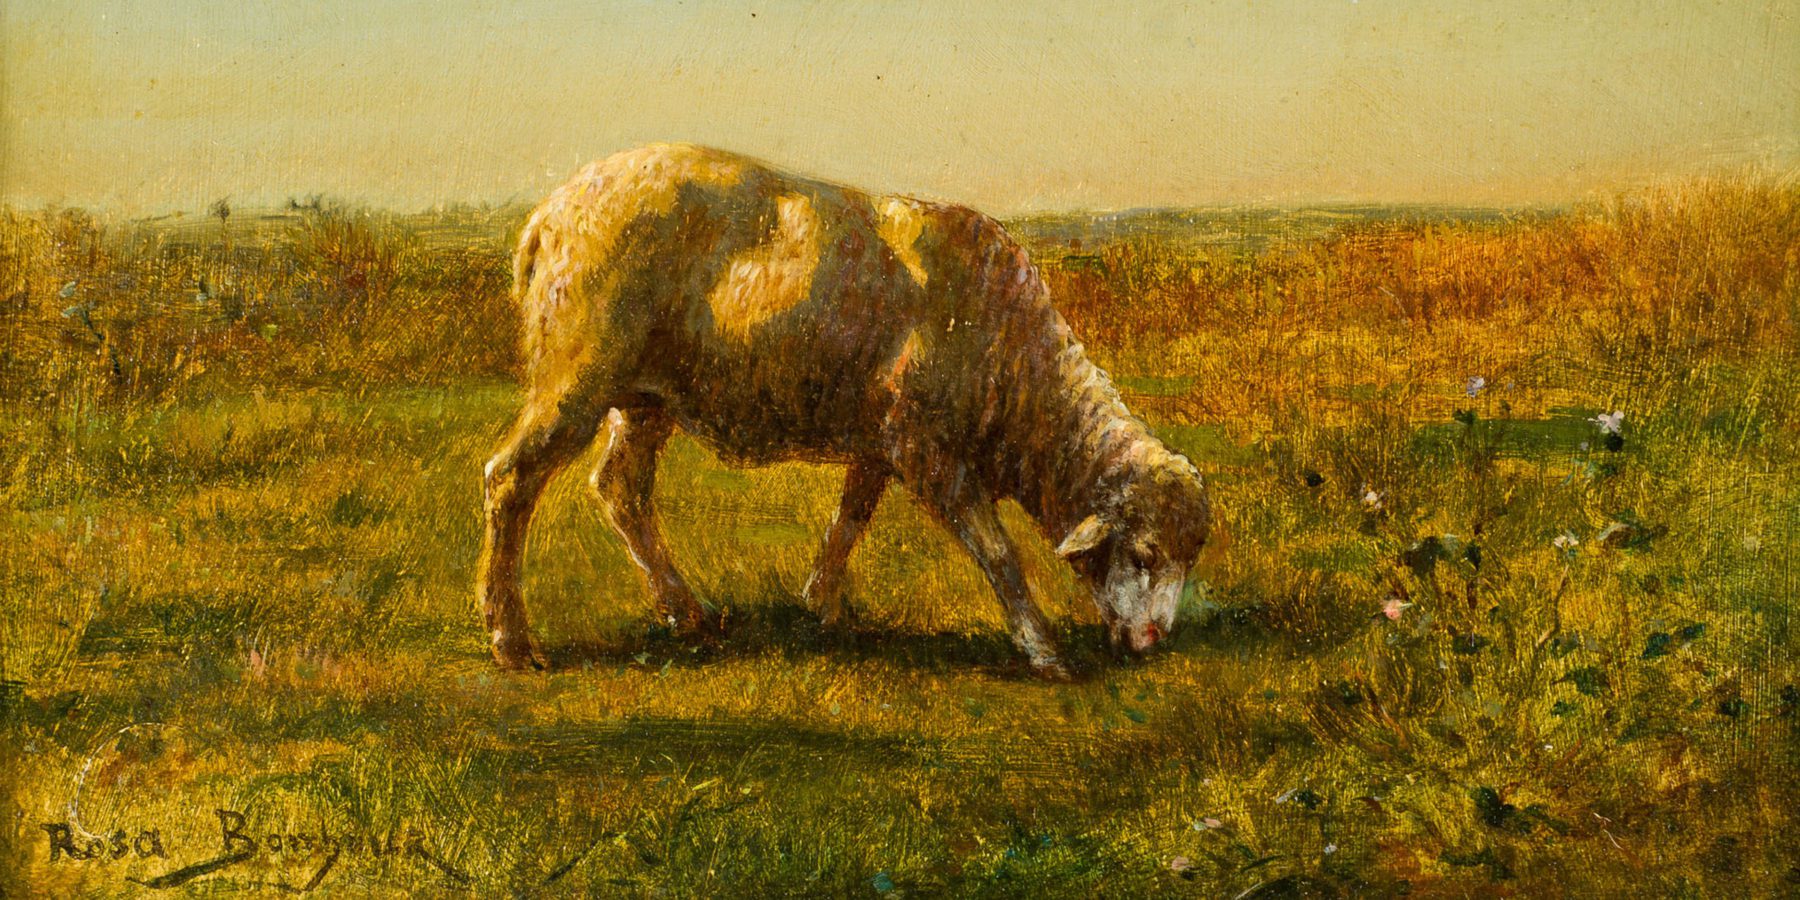 Curators in Conversation: “She Paints Like a Man:” The Radical Art and Life of Rosa Bonheur